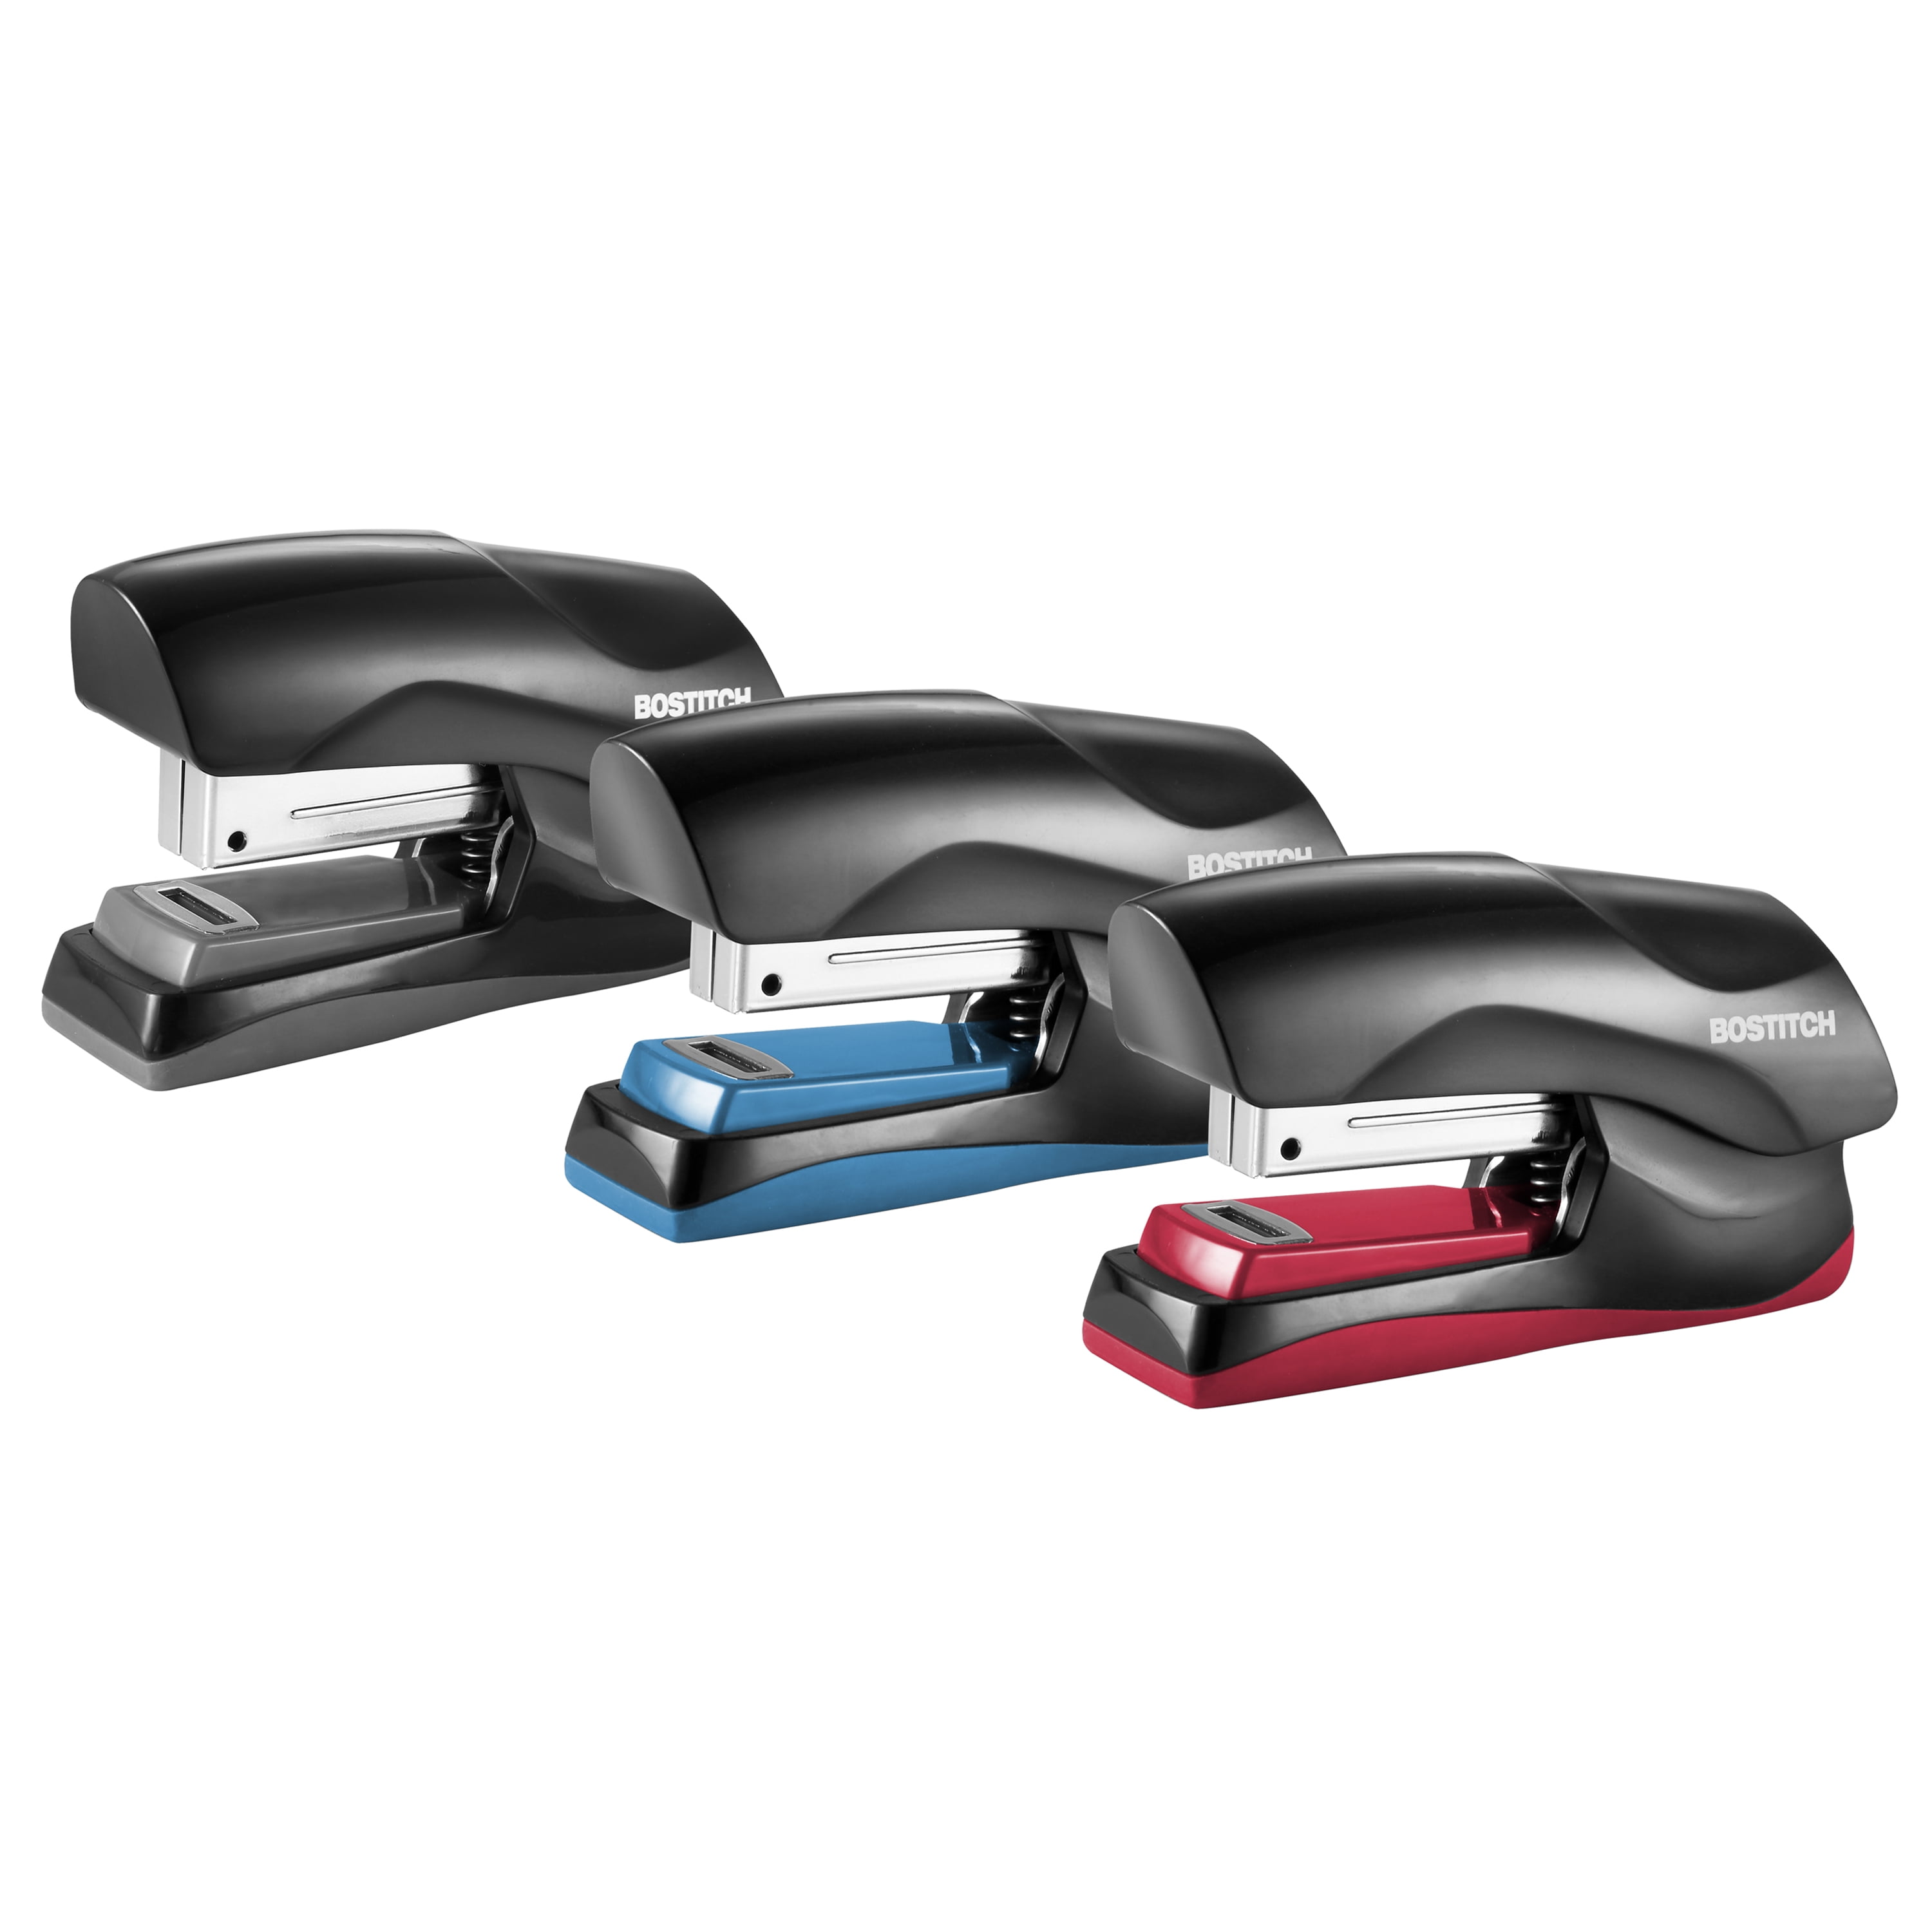 1 Small Stapler Size Black 3-Pack Fits into The Palm of Your Hand; 3-Pack Office Heavy Duty 40 Sheet Stapler 